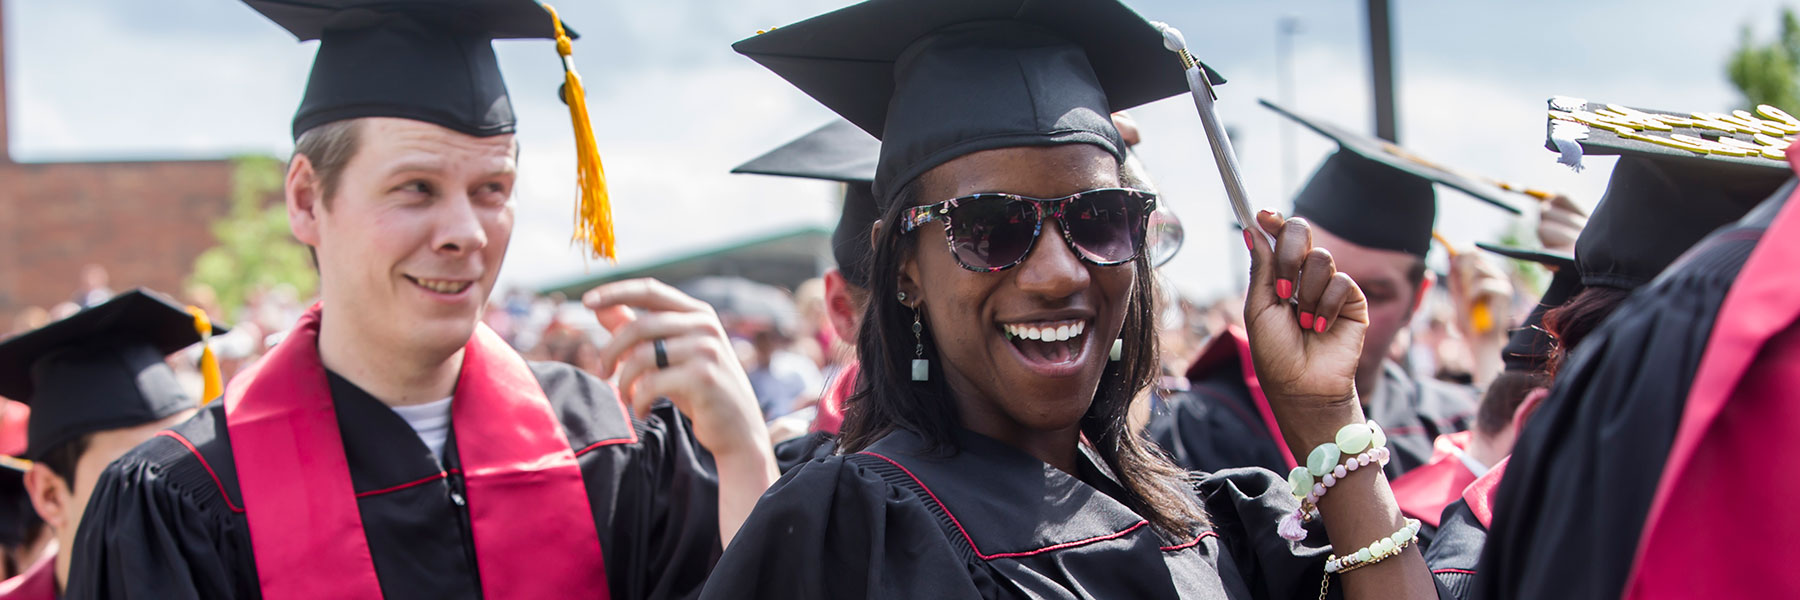 A woman in sunglasses turns her tassel while laughing